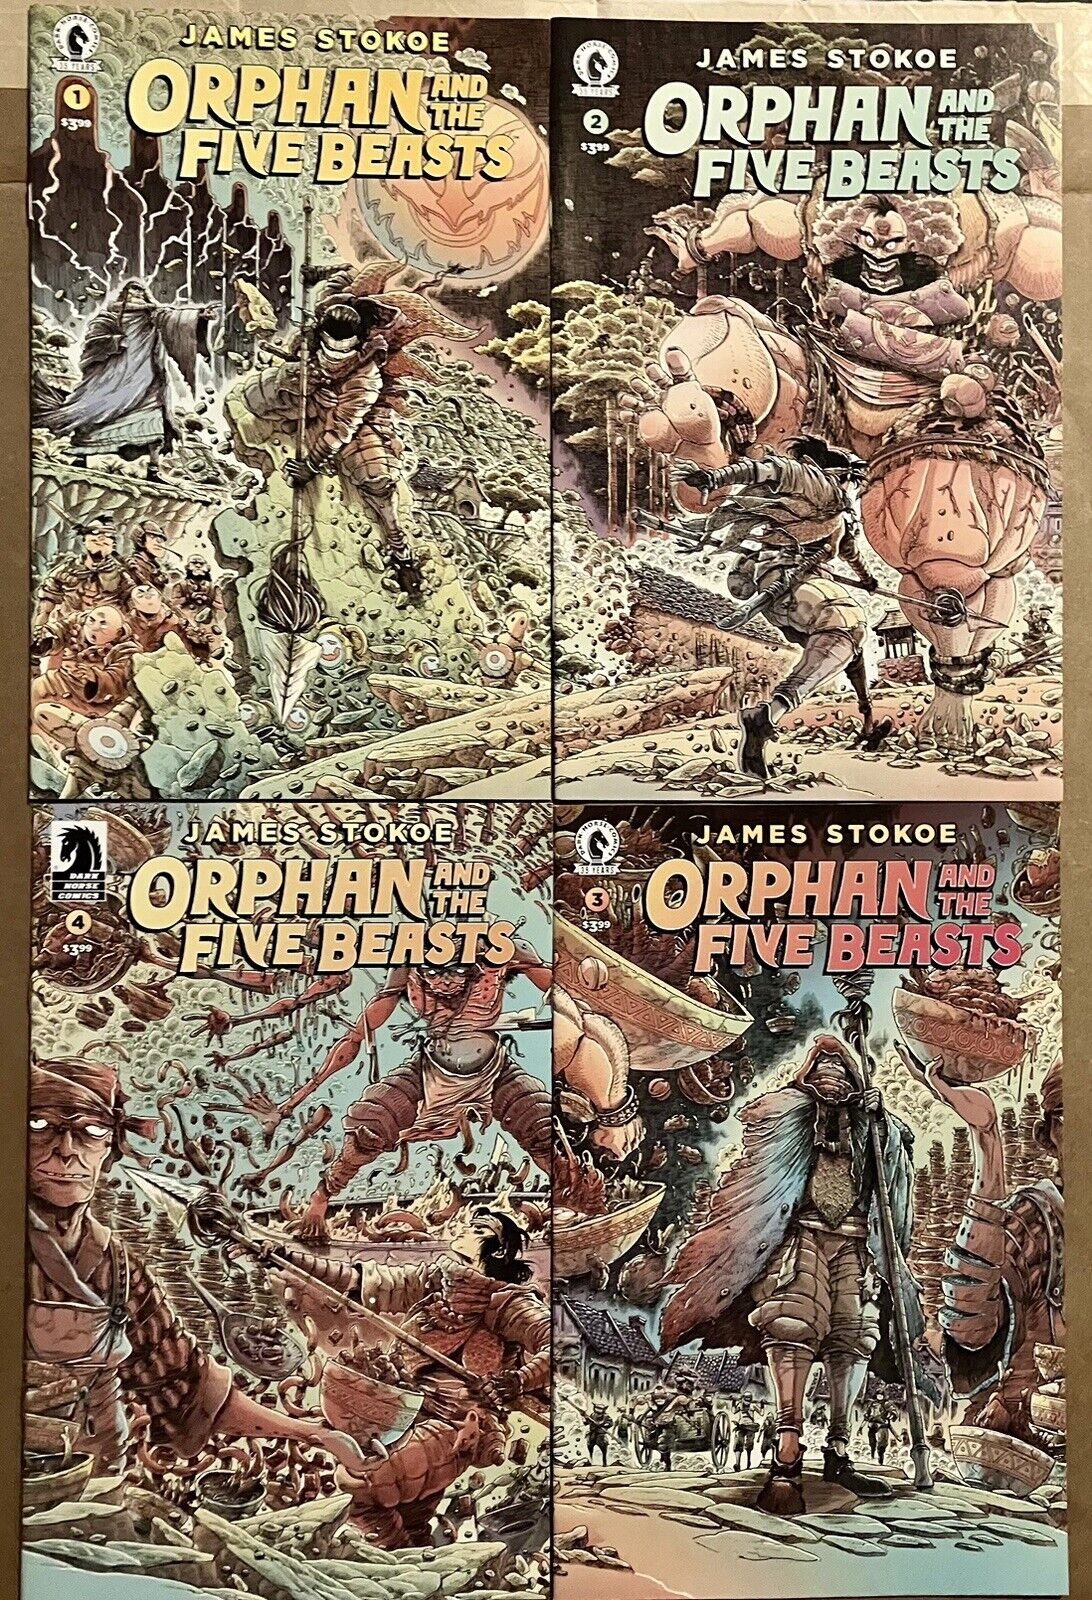 Orphan and the Five Beasts Complete Set 1-4 2021 Dark Horse Comics - James Stoko